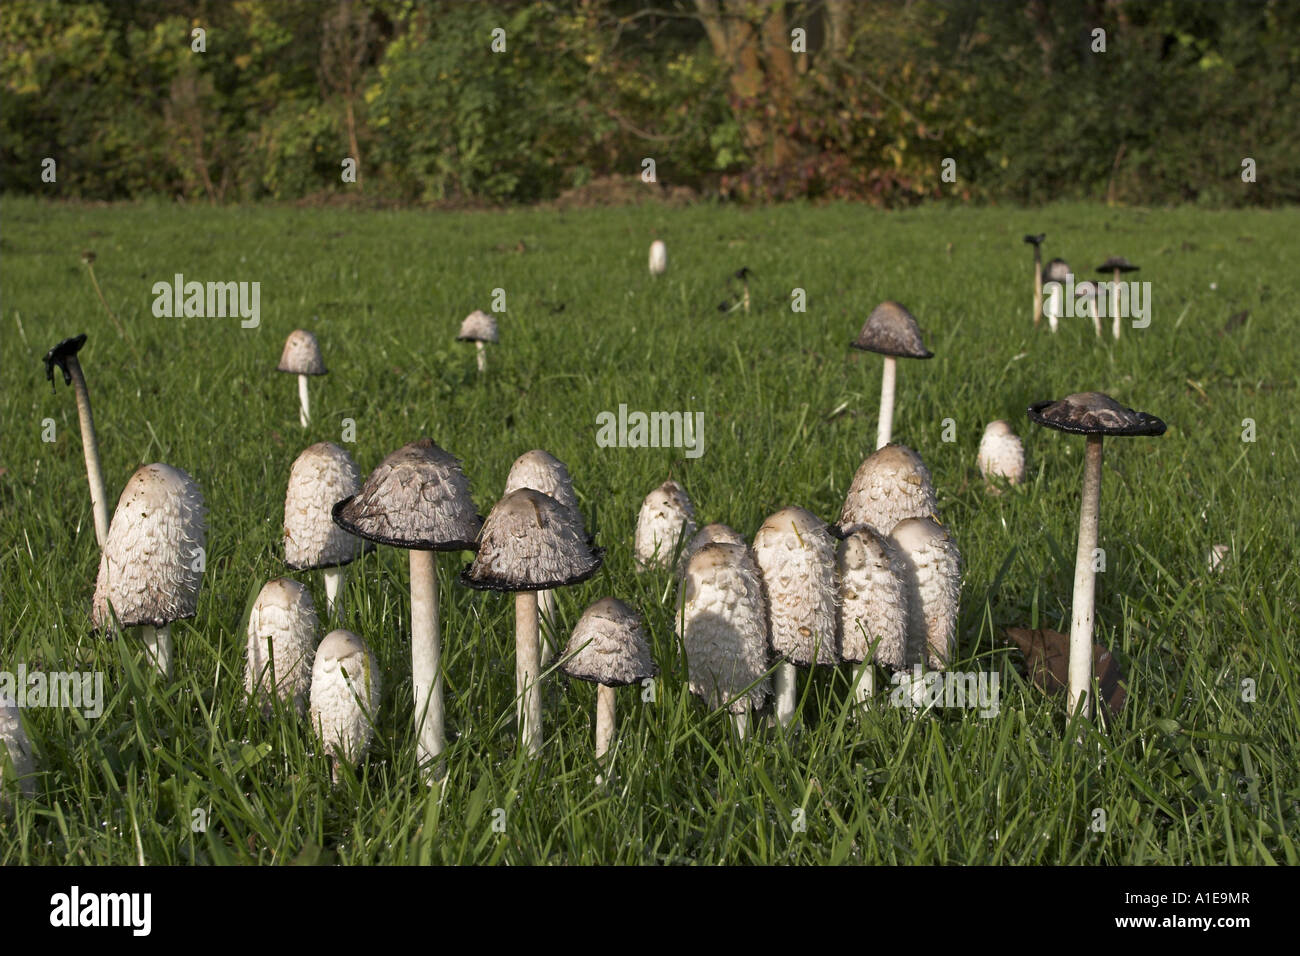 wig (Coprinus comatus), several individuals in a meadow Stock Photo